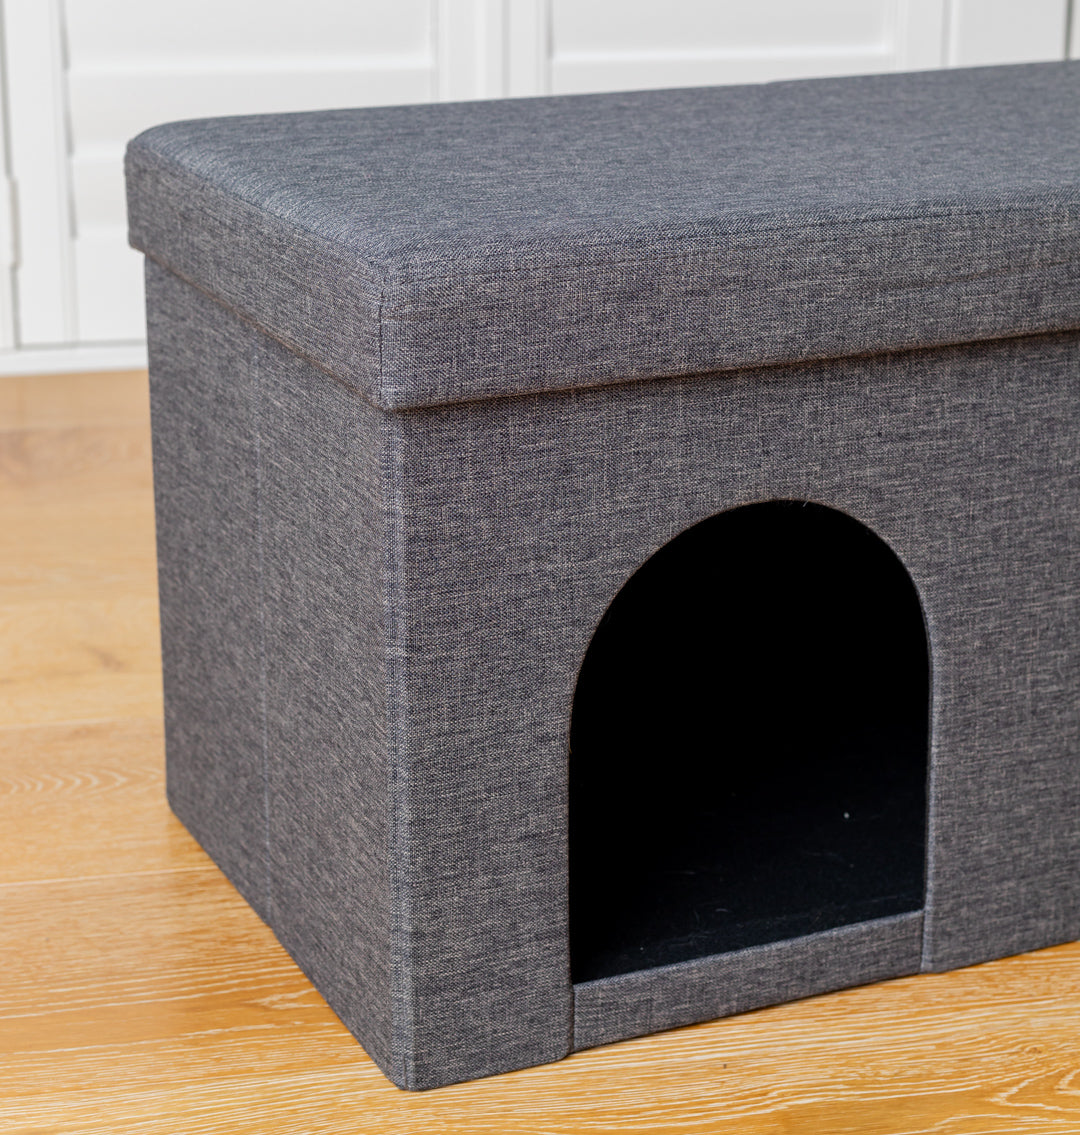 Large Charcoal Pet Ottoman For Dogs and Cats